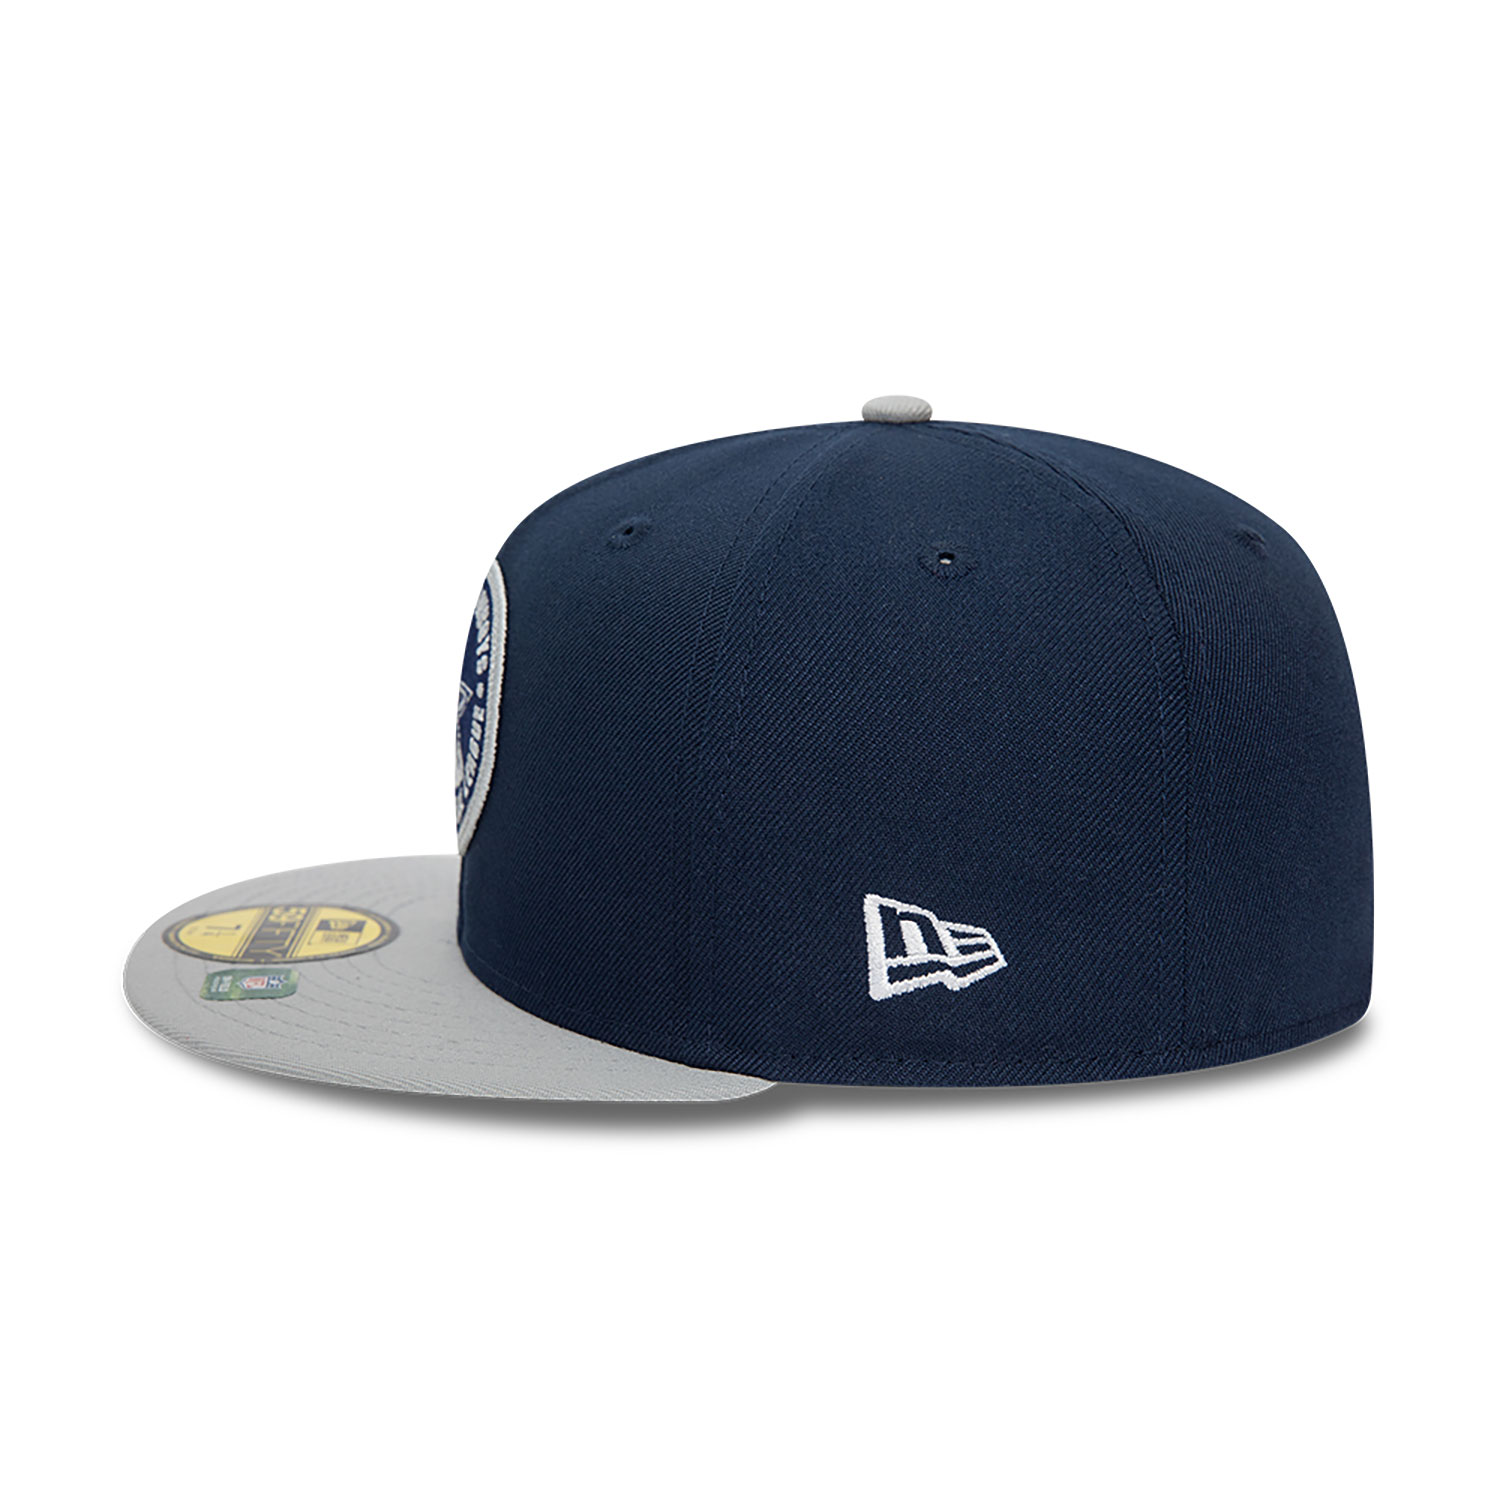 NFL Sideline Dallas Cowboys 59FIFTY Fitted Cap | New Era Cap FR